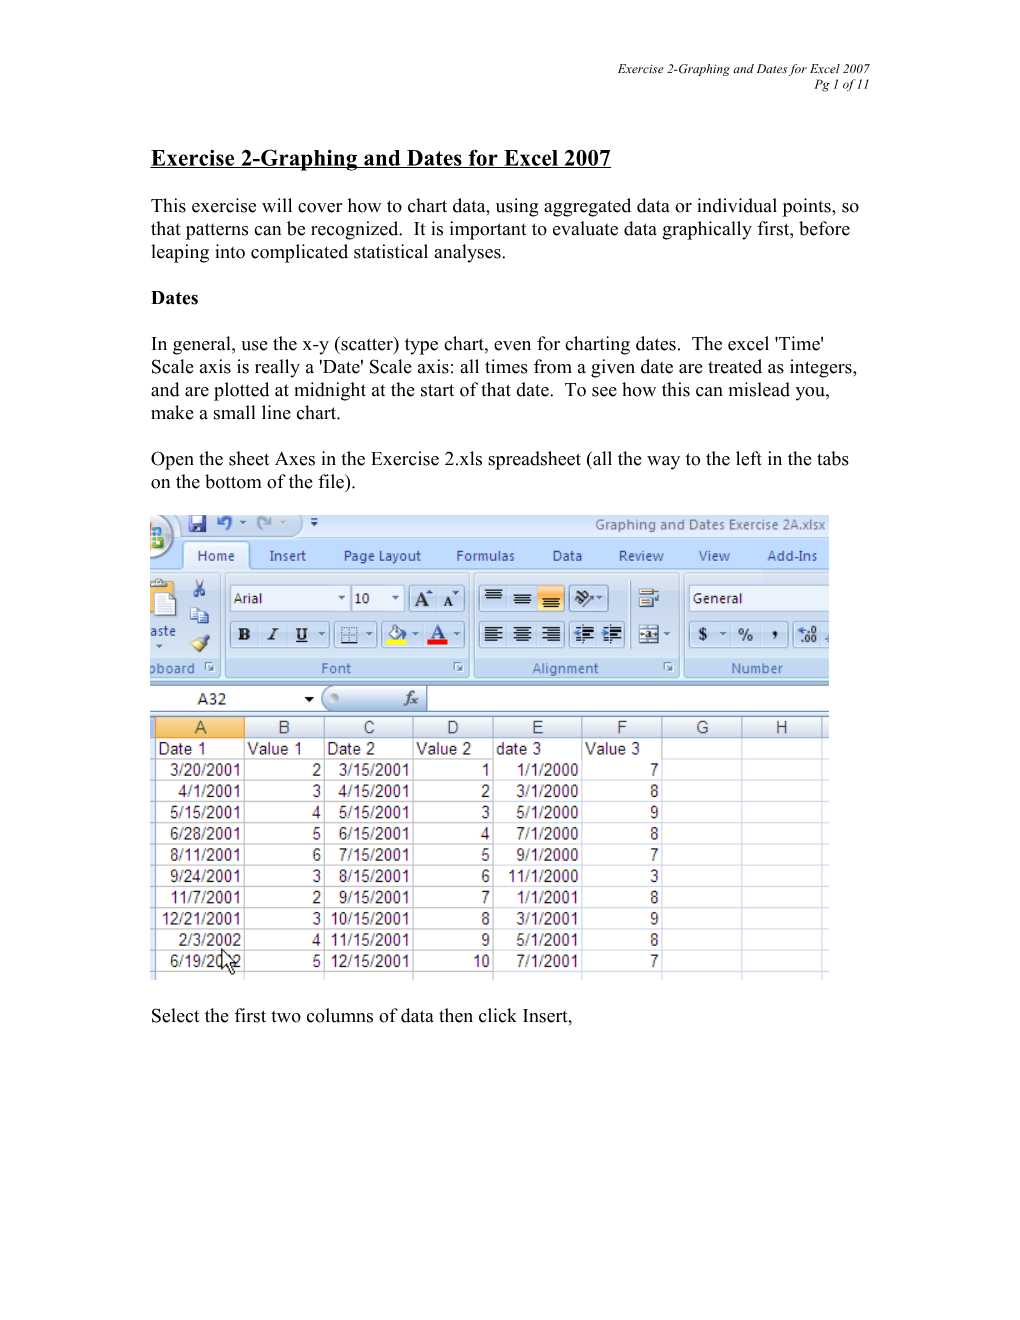 Exercise 2-Graphing and Dates for Excel 2007